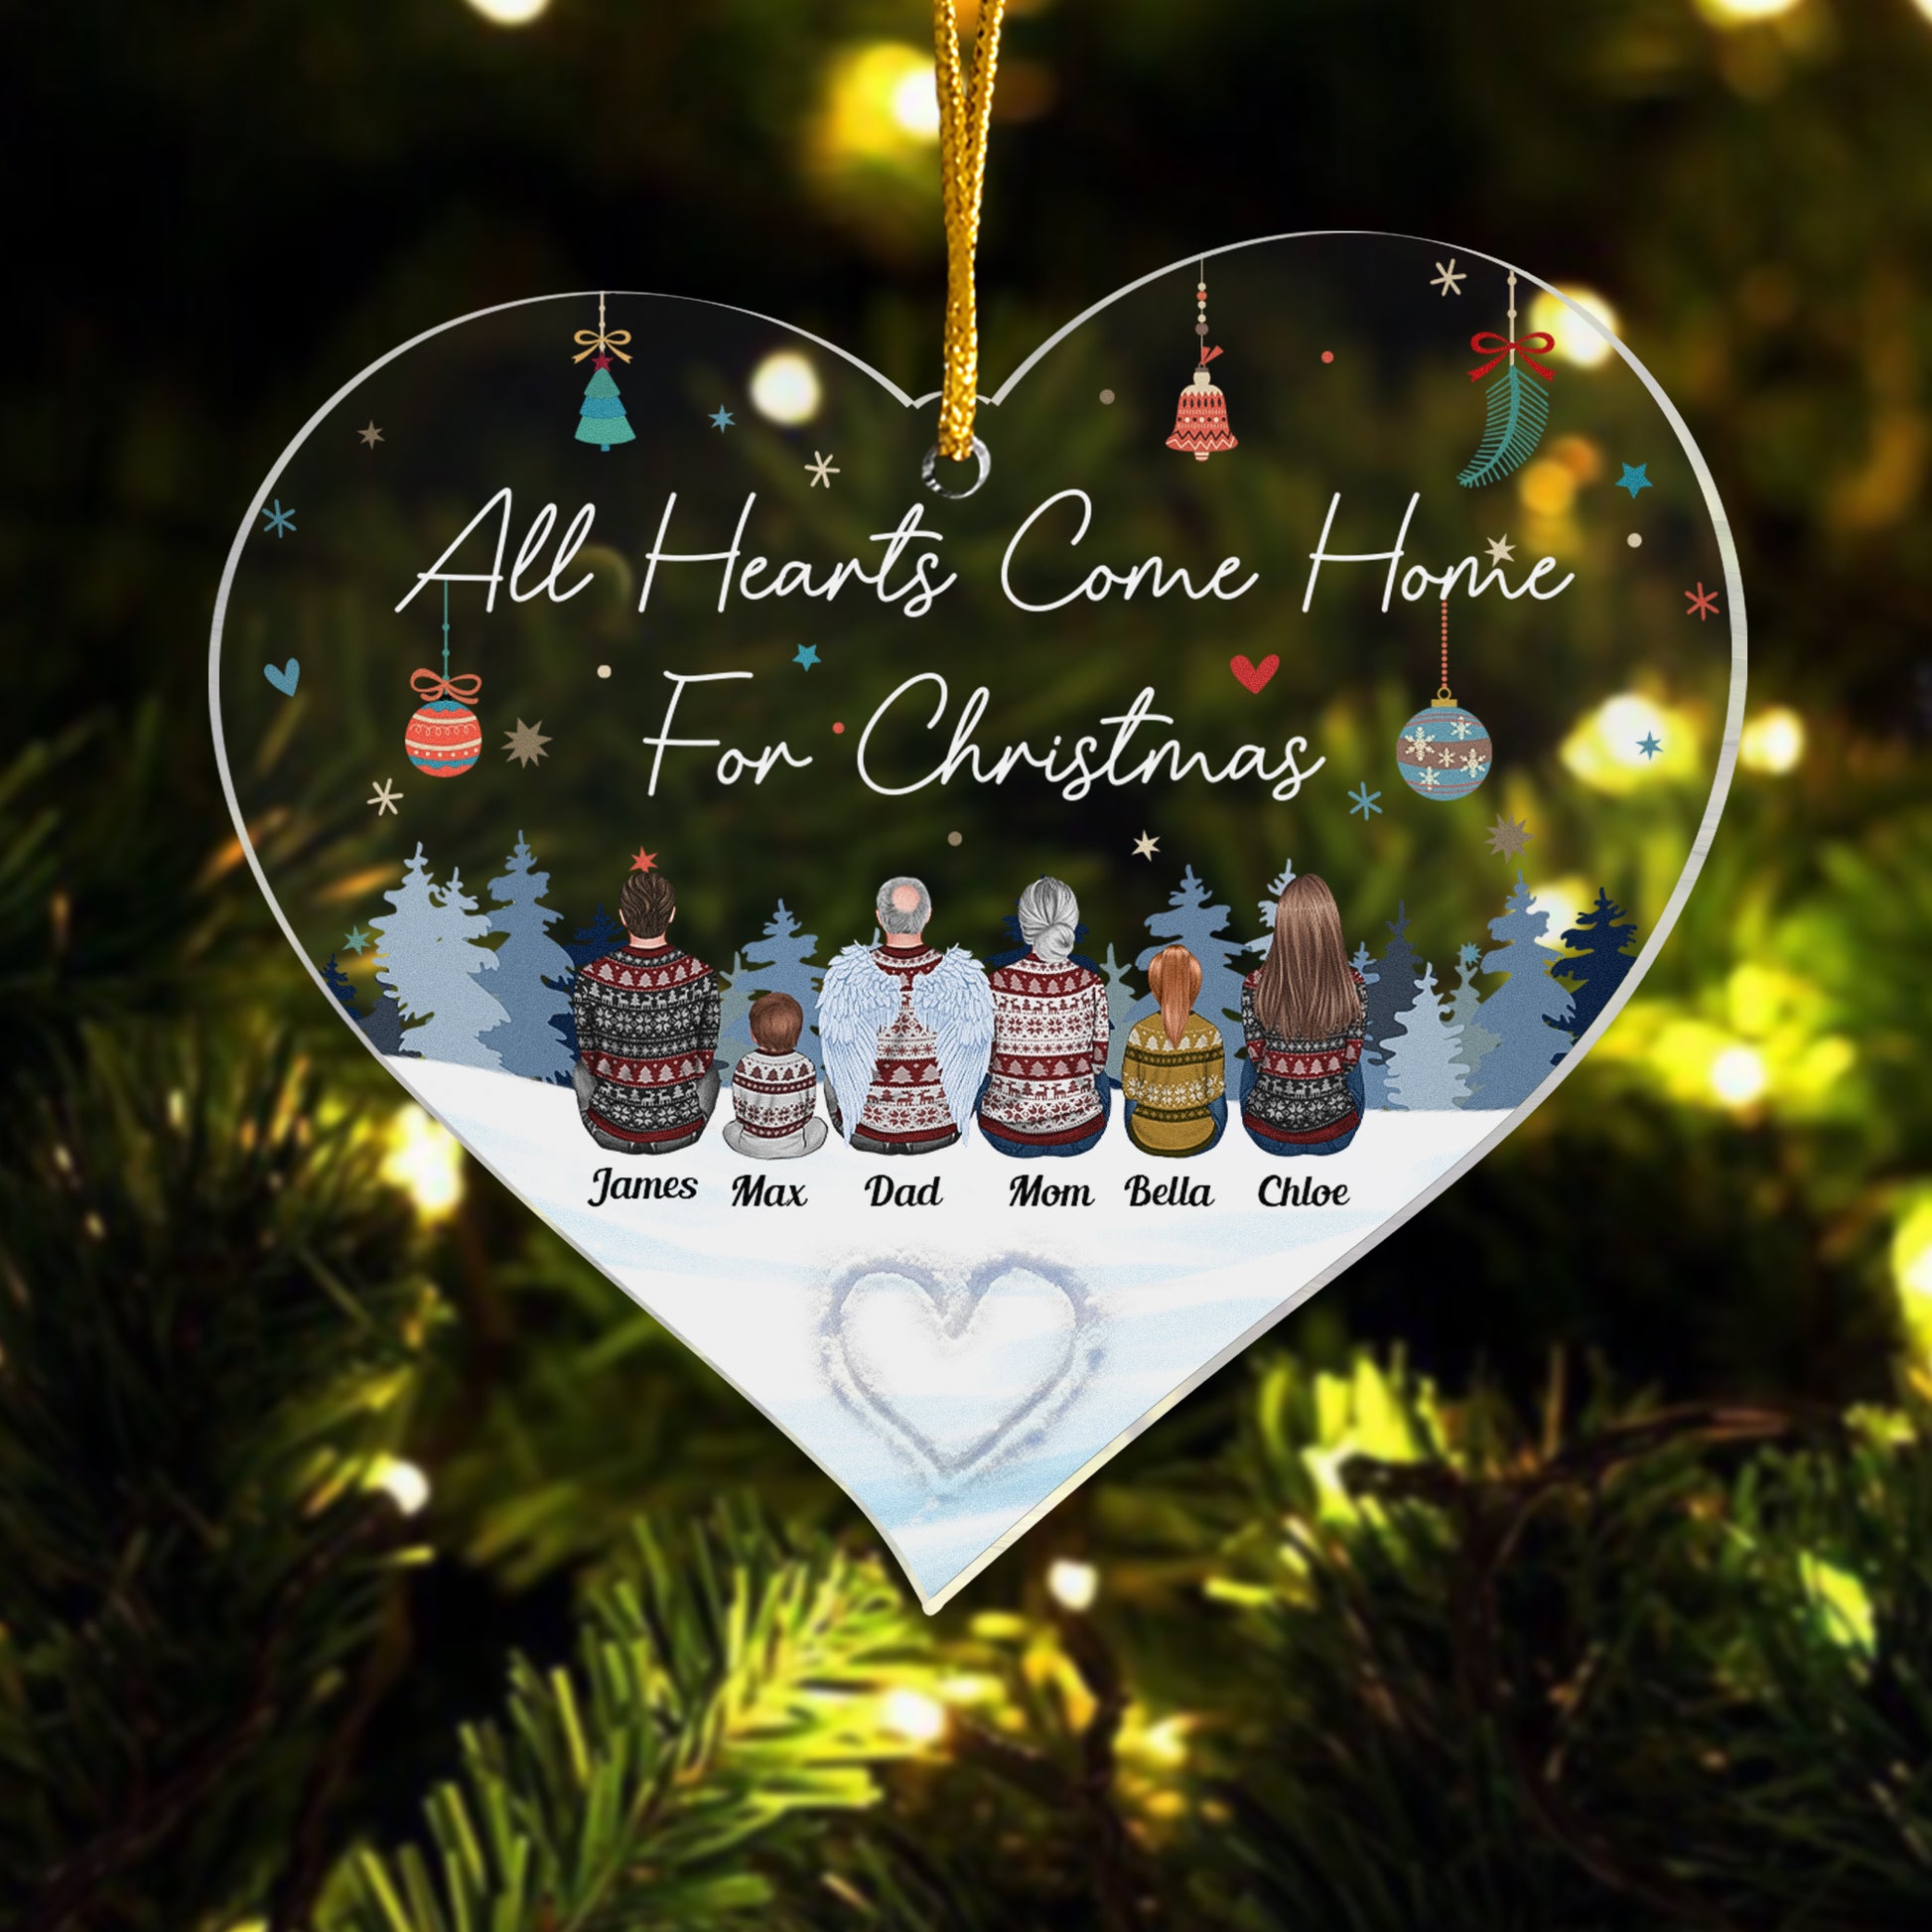 Hearts Come Home For Christmas - Personalized Custom Shape Ornament - Christmas Gift For Family Members, Dad, Mom, Sisters, Brothers